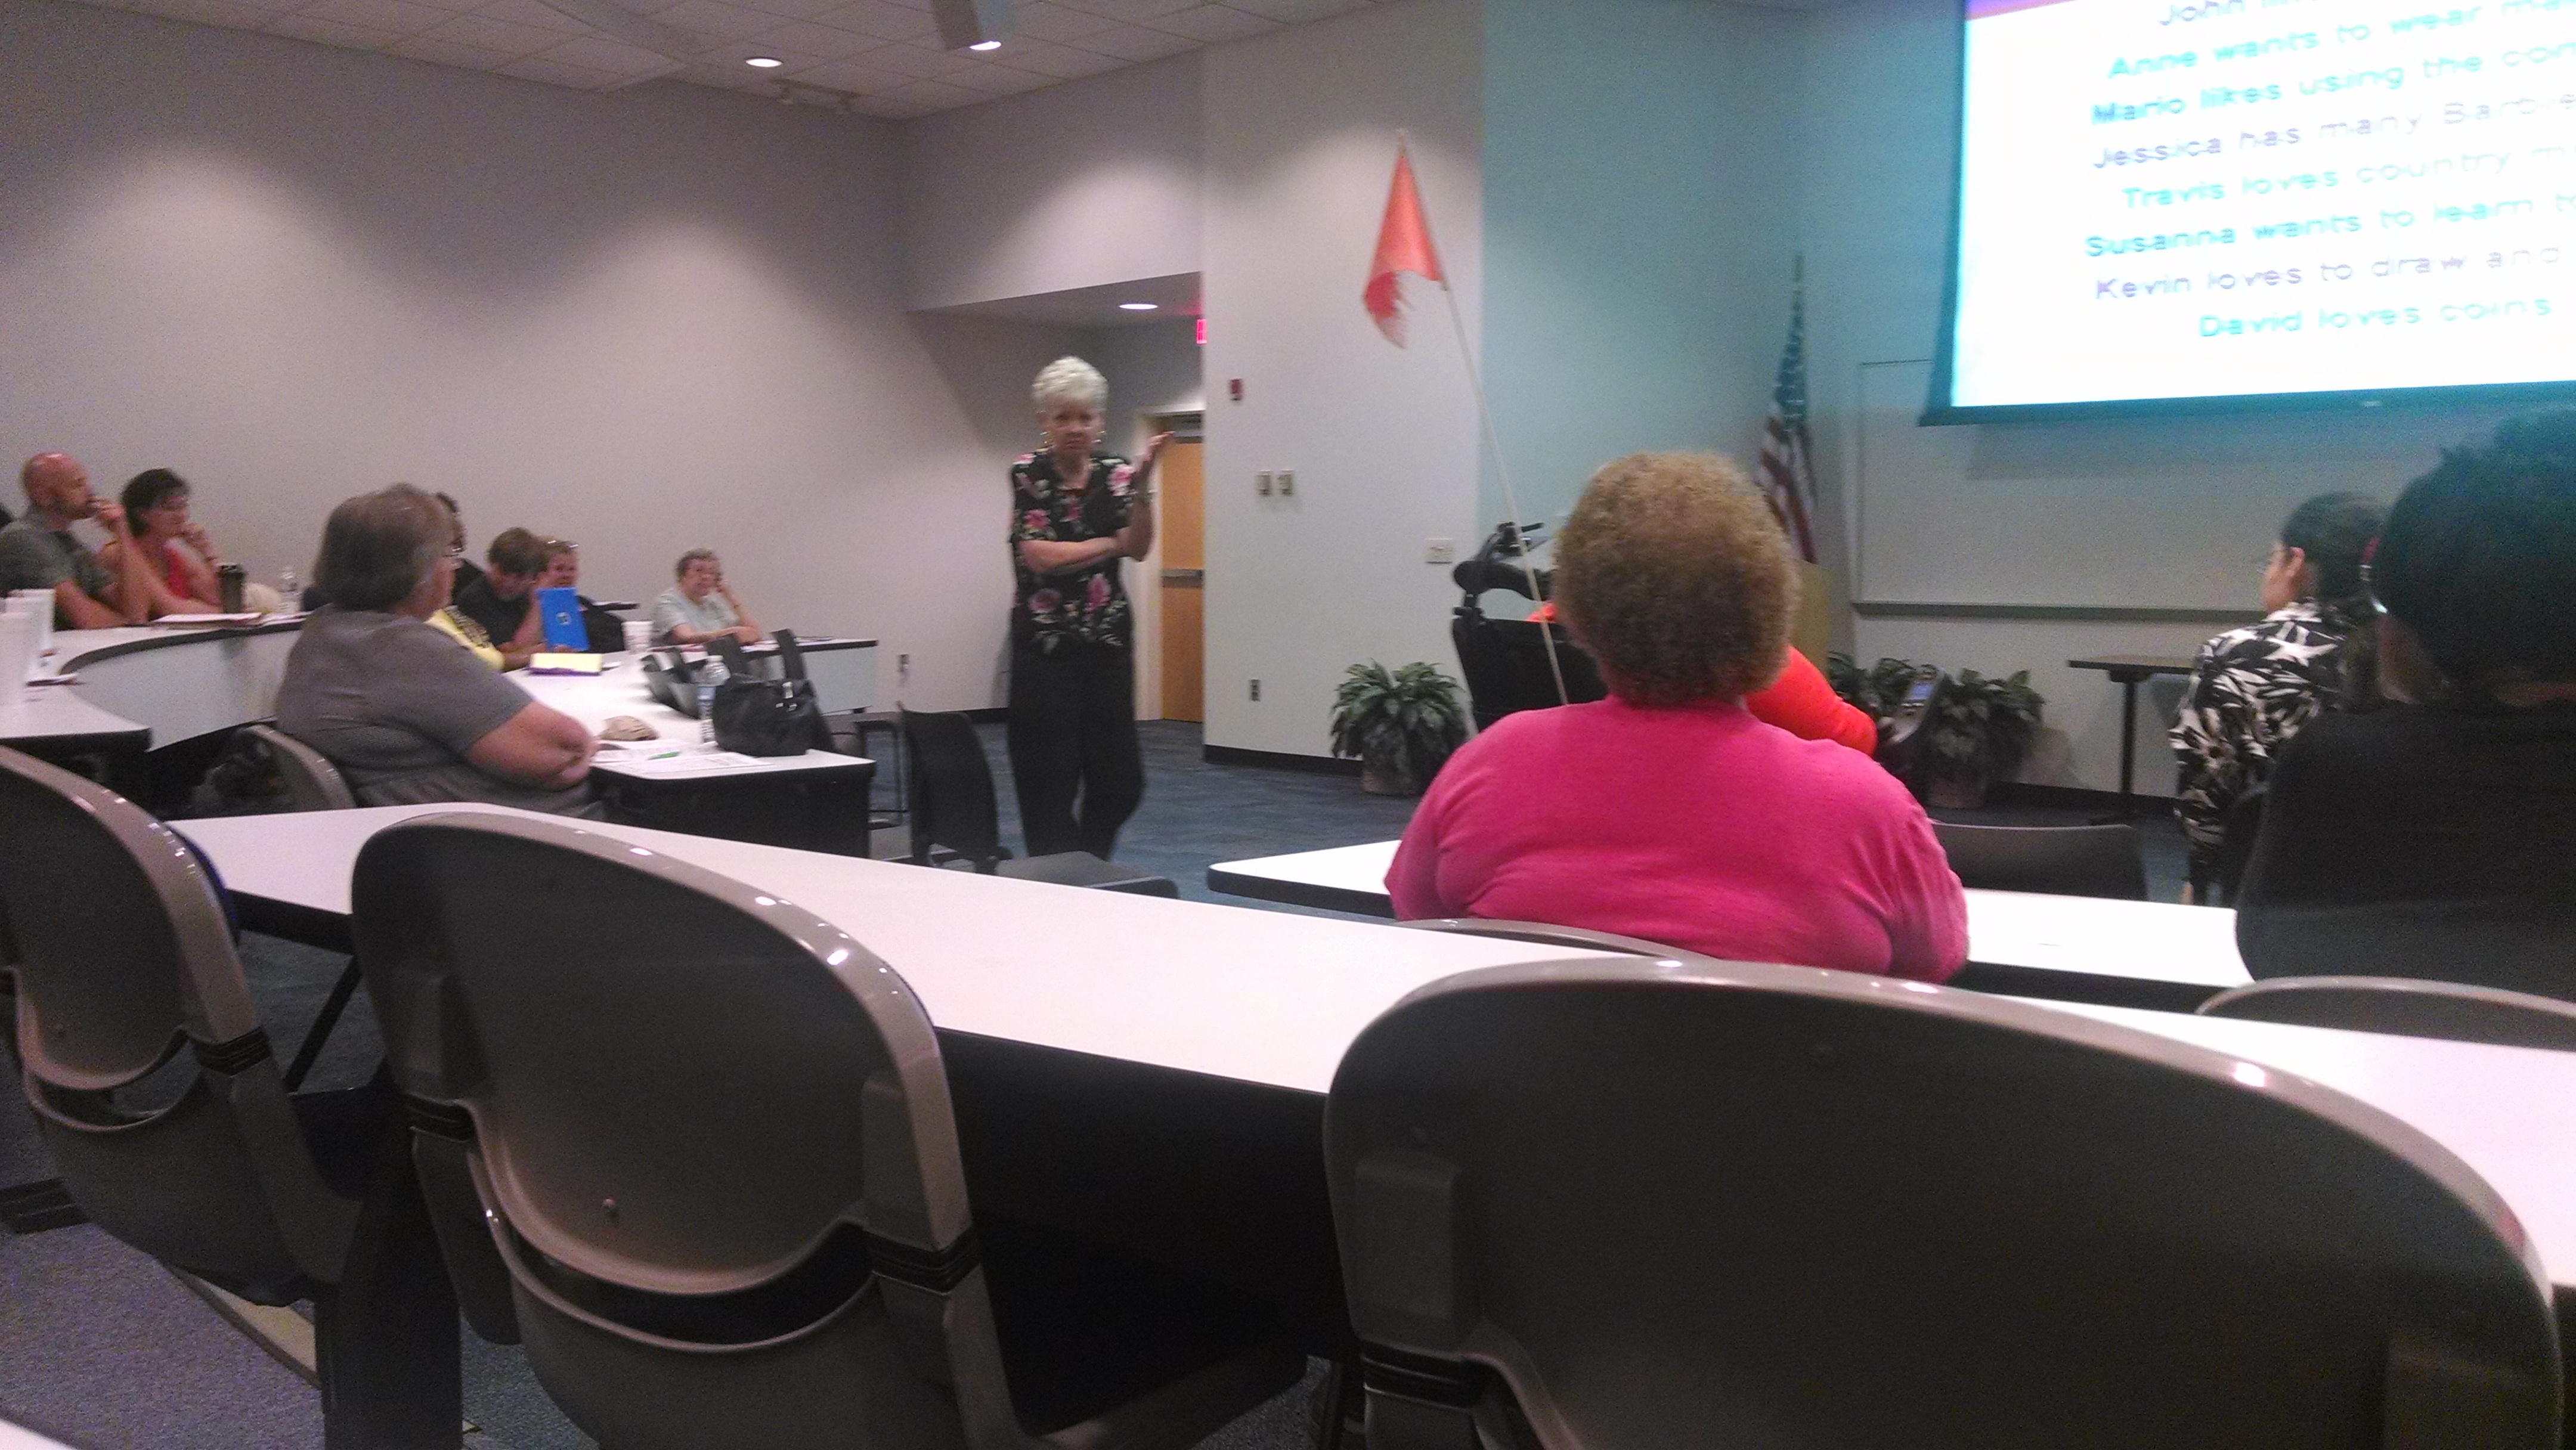 The Northwest Area Two Family Care Council sponsored Kathie Snow, author of “Disability is Natural” to provide training to the Panama City and surrounding communities on June 16, 2015 at the Gulf Coast State college.